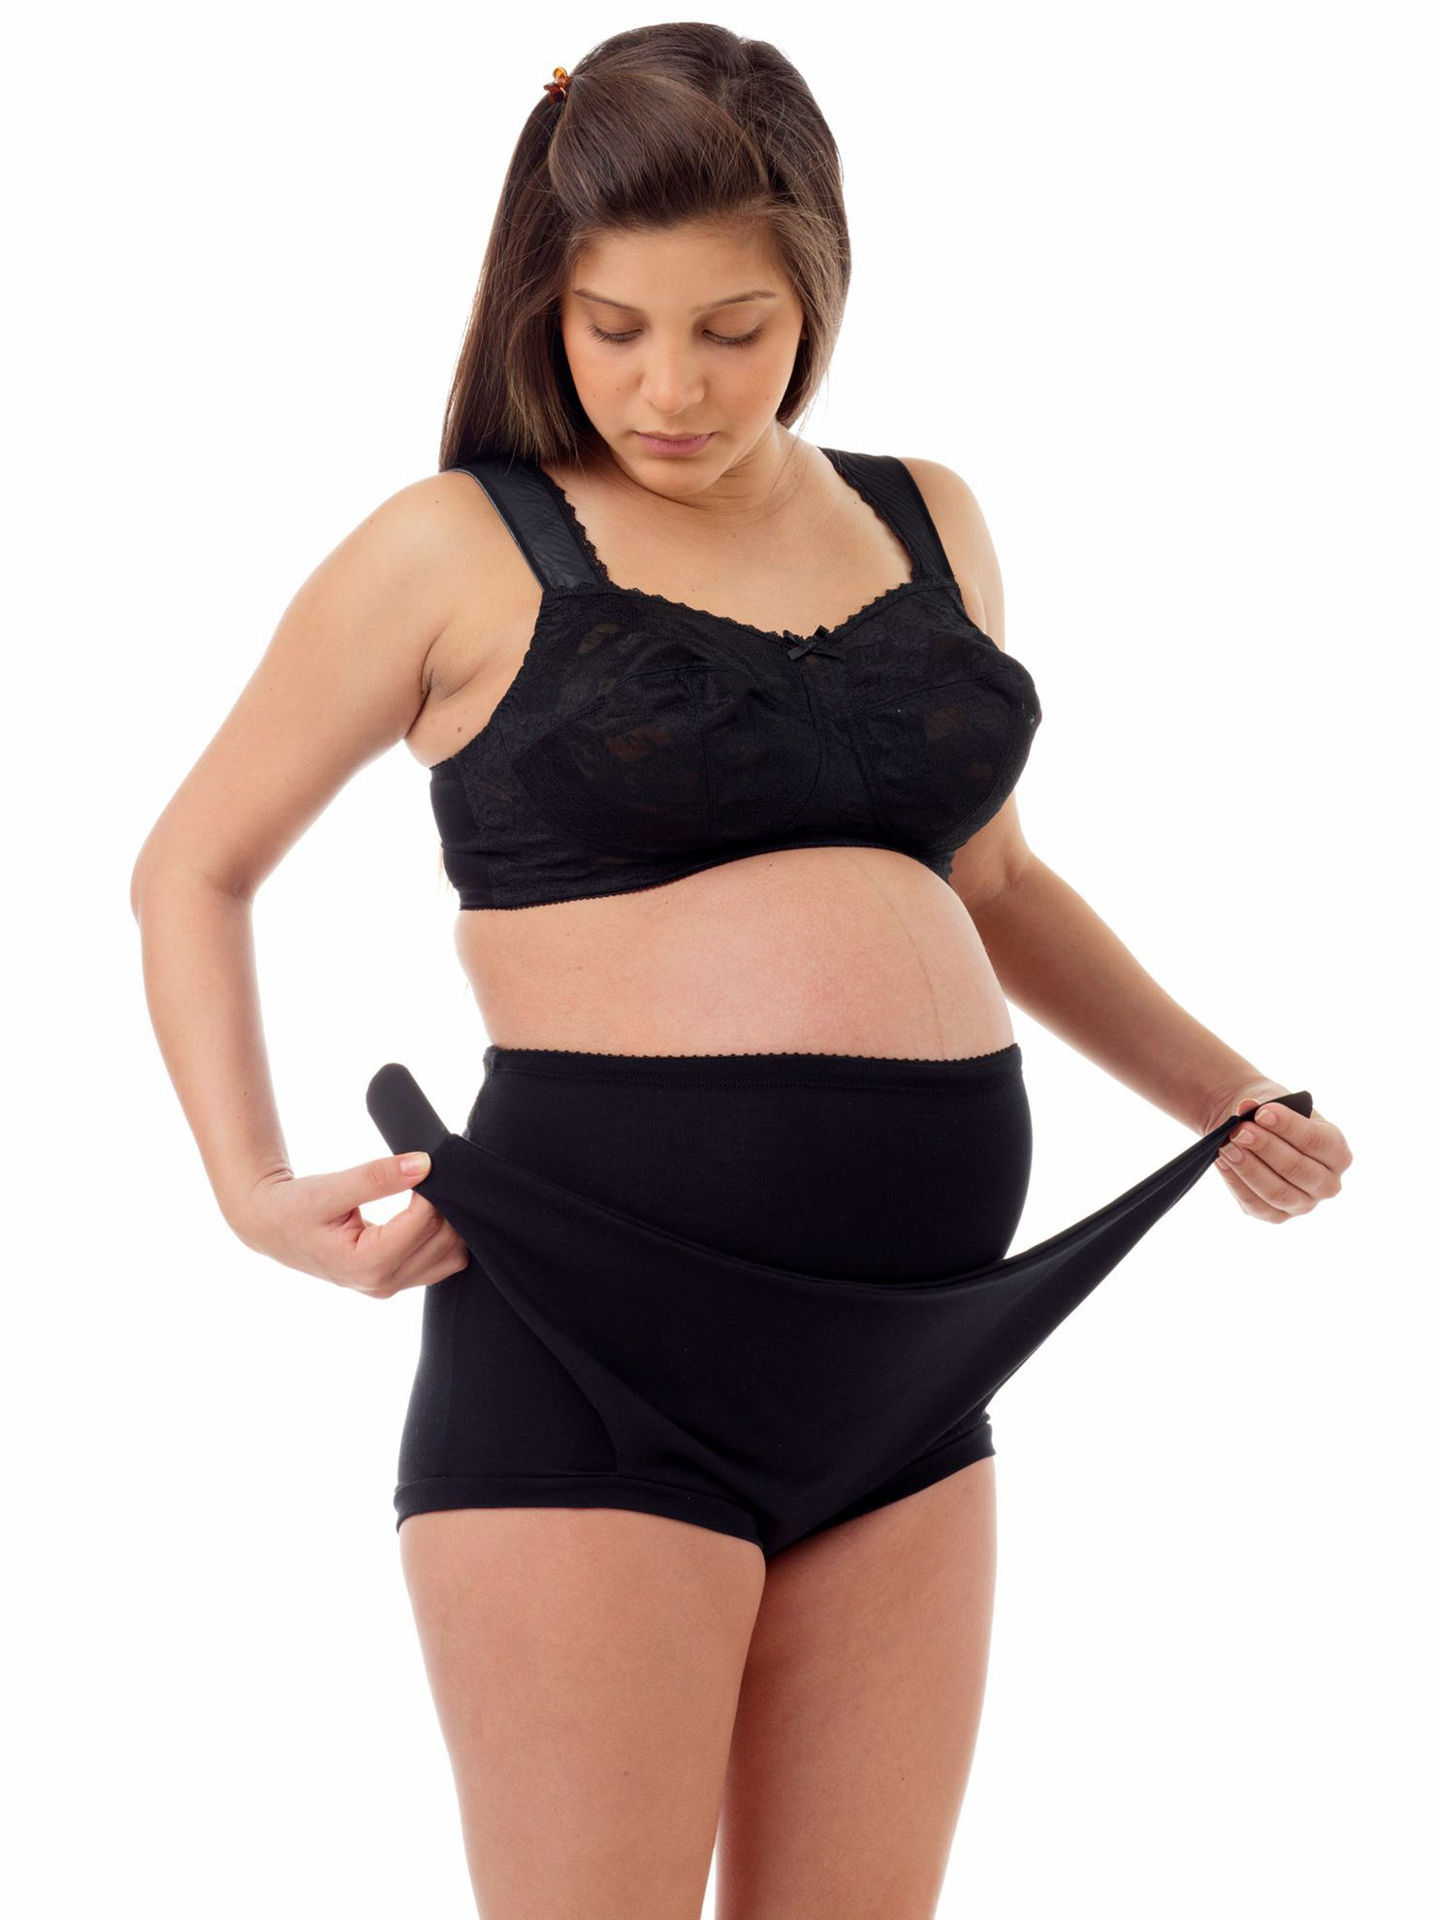 https://www.underworks.com/images/thumbs/0000605_adjustable-maternity-support-lift-brief.jpeg